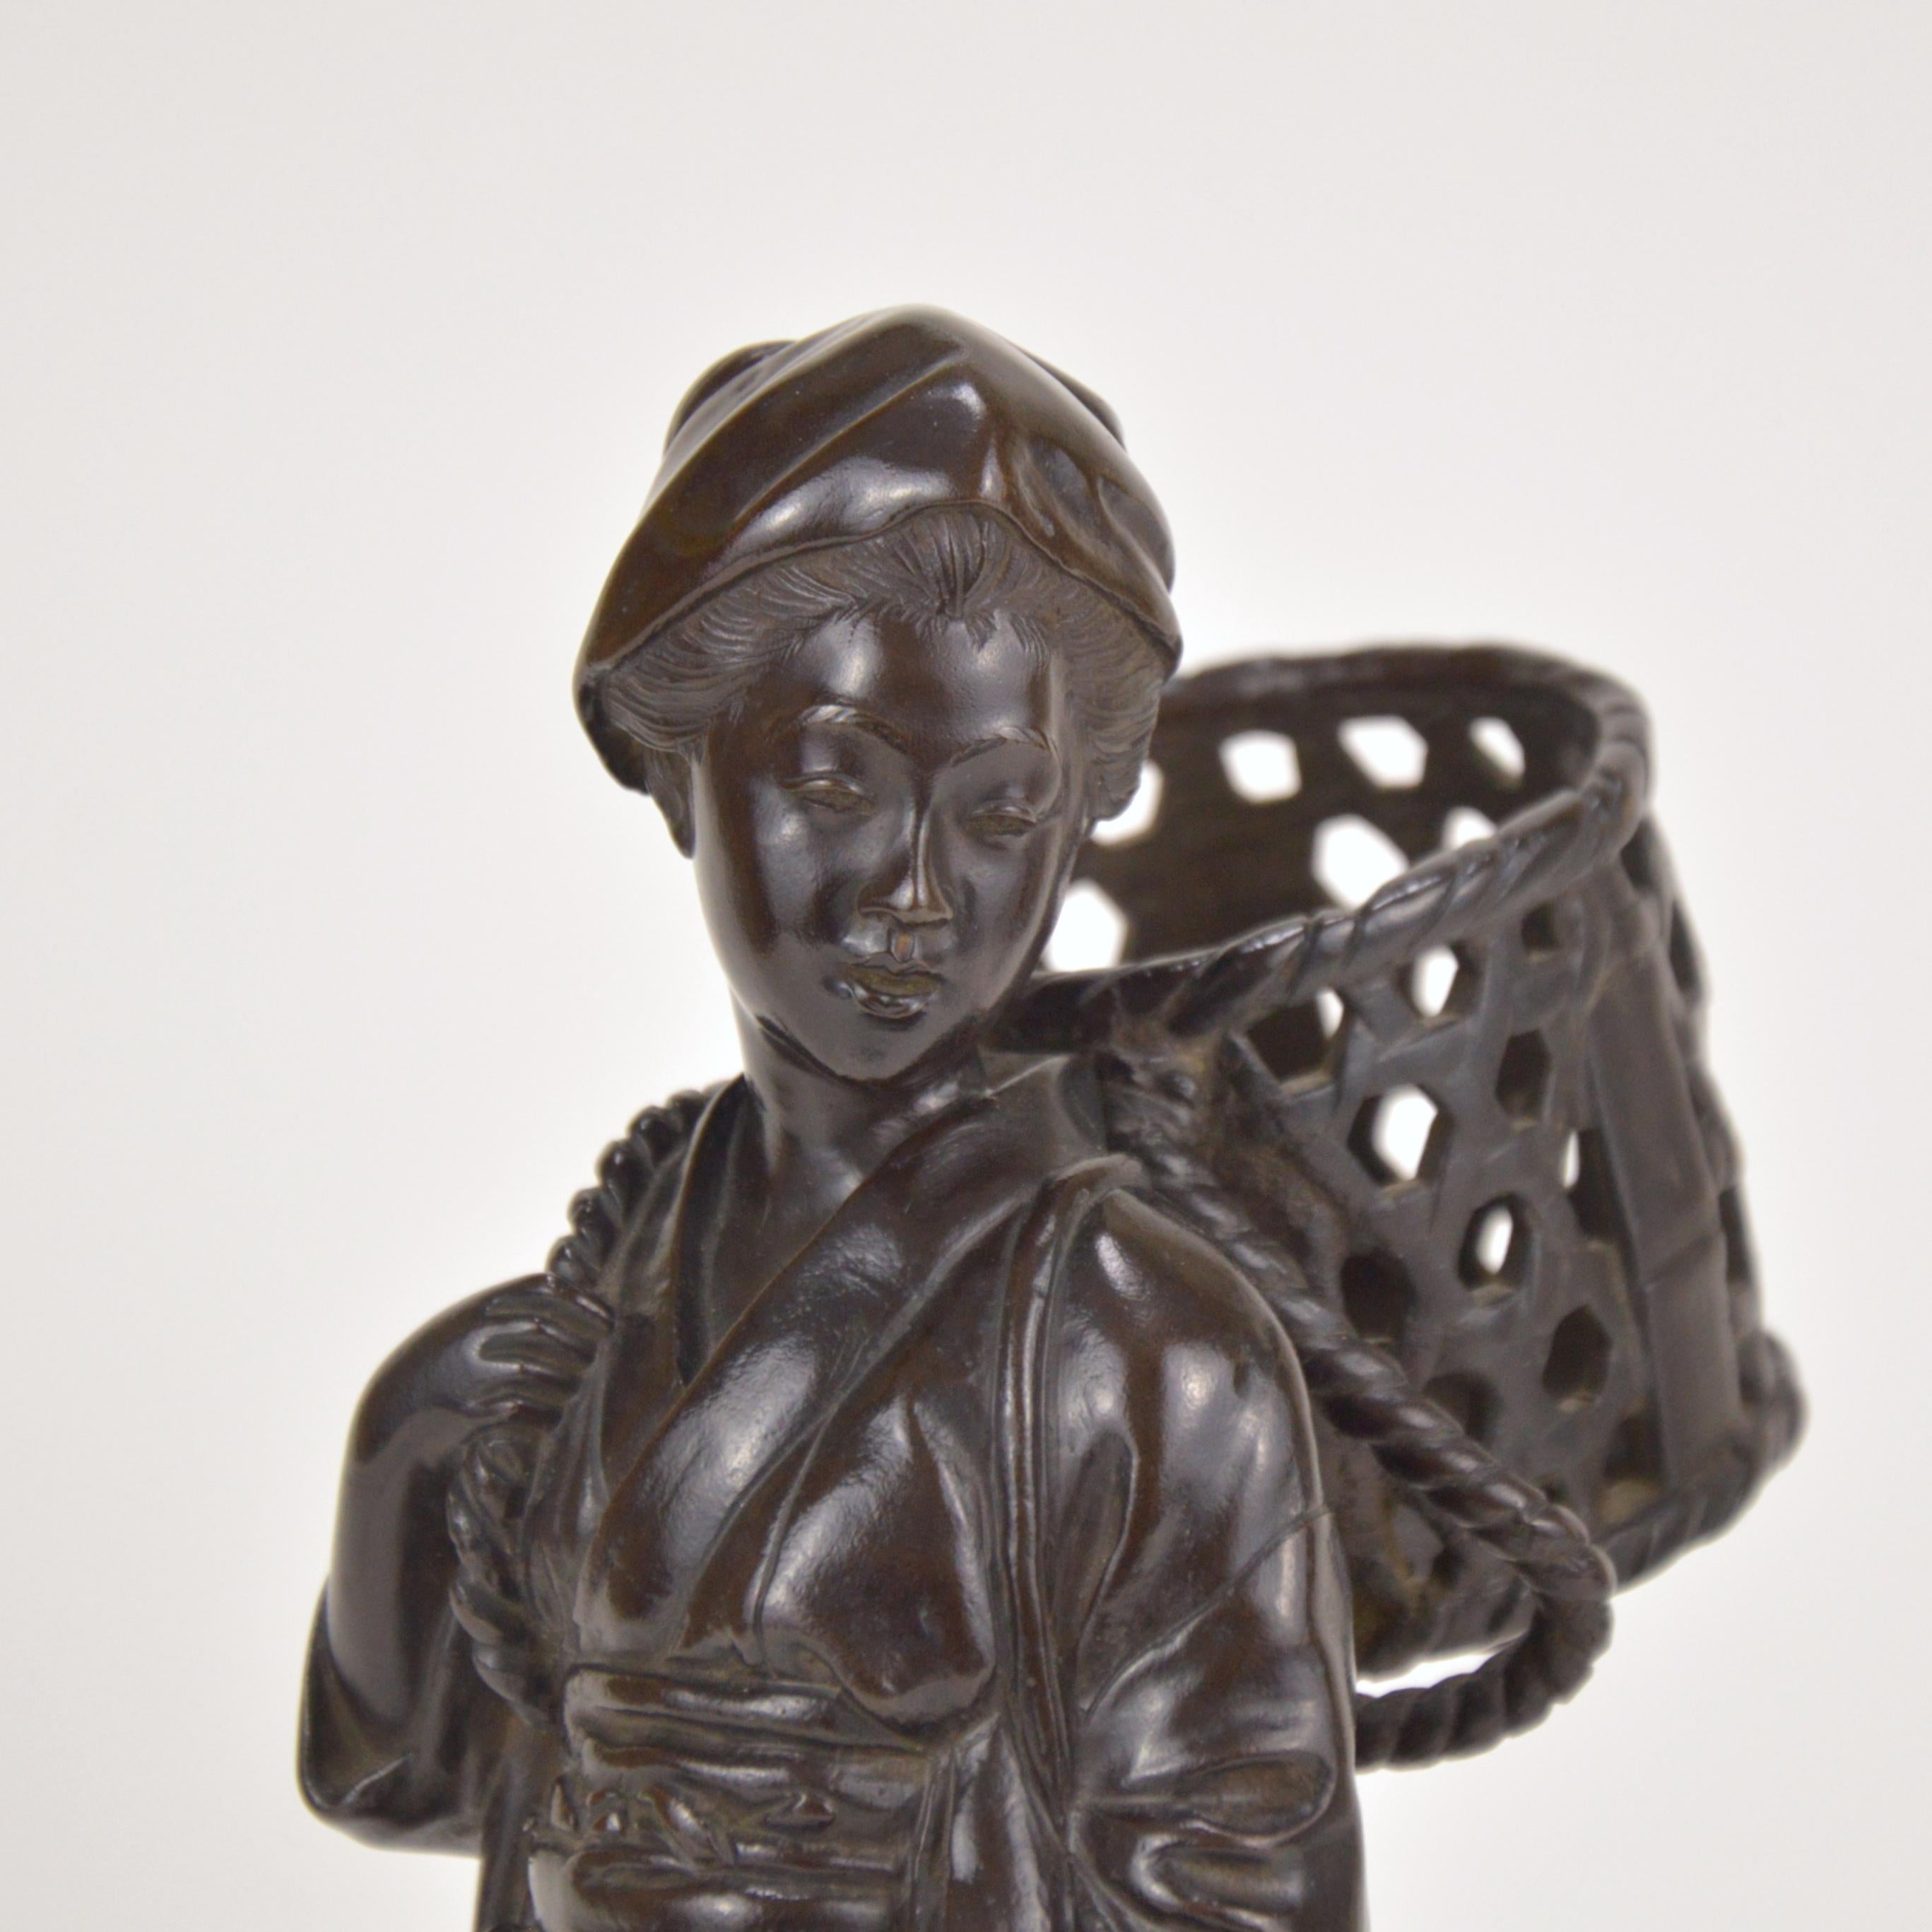 Patinated bronze statue representing a young peasant girl holding a basket. Japan, early 20th century. Marked on the base.